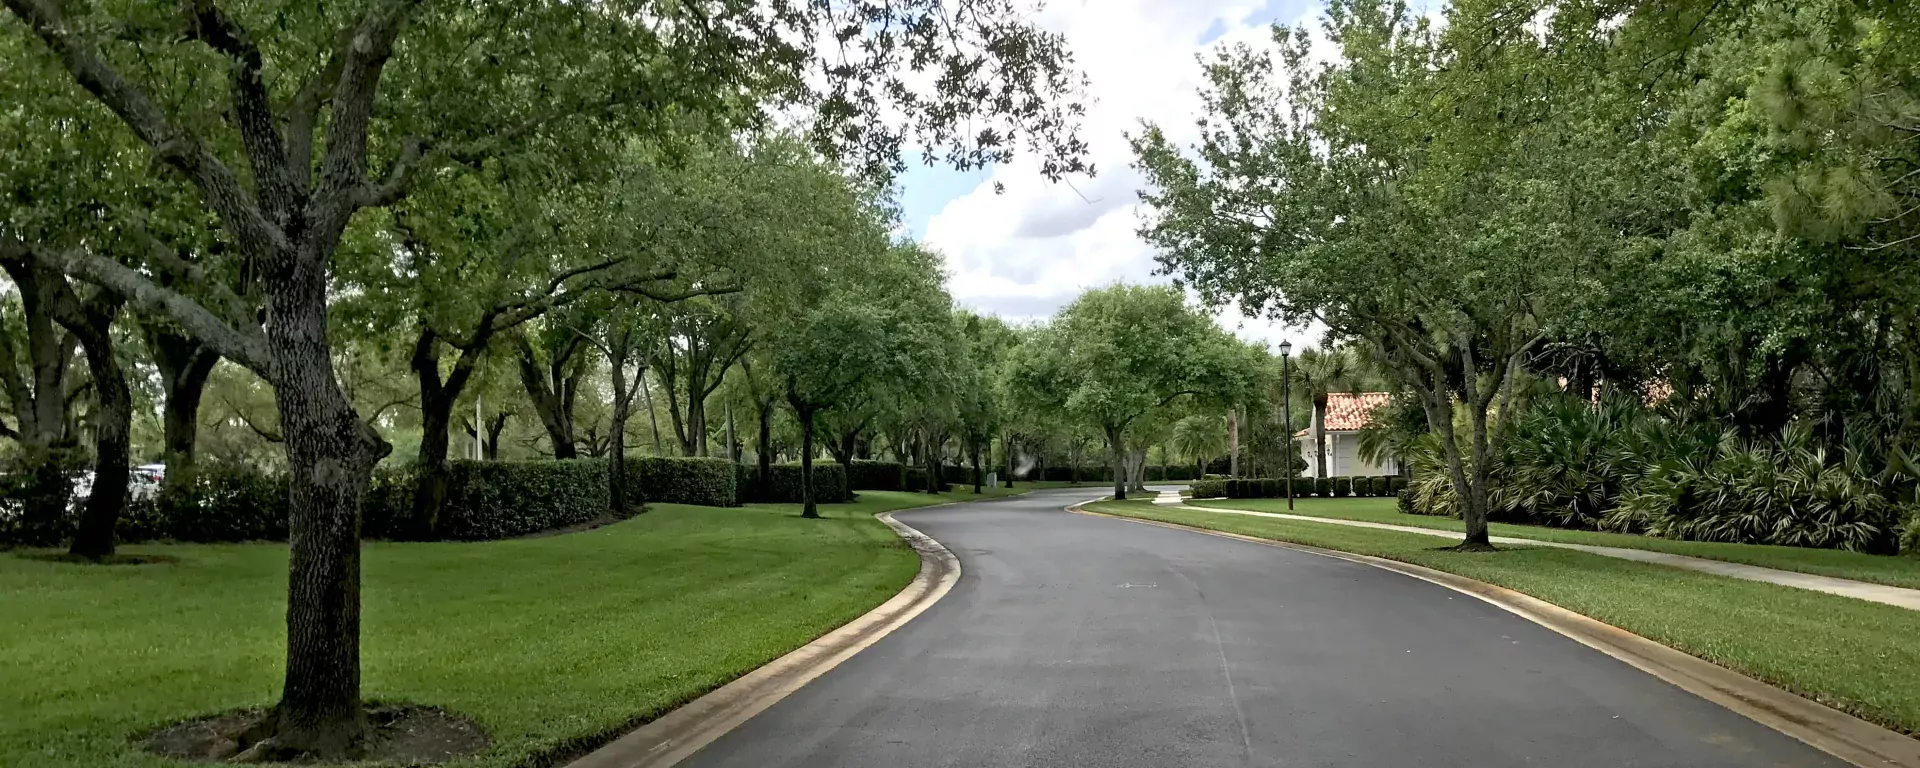 Trees along a road in a residential community